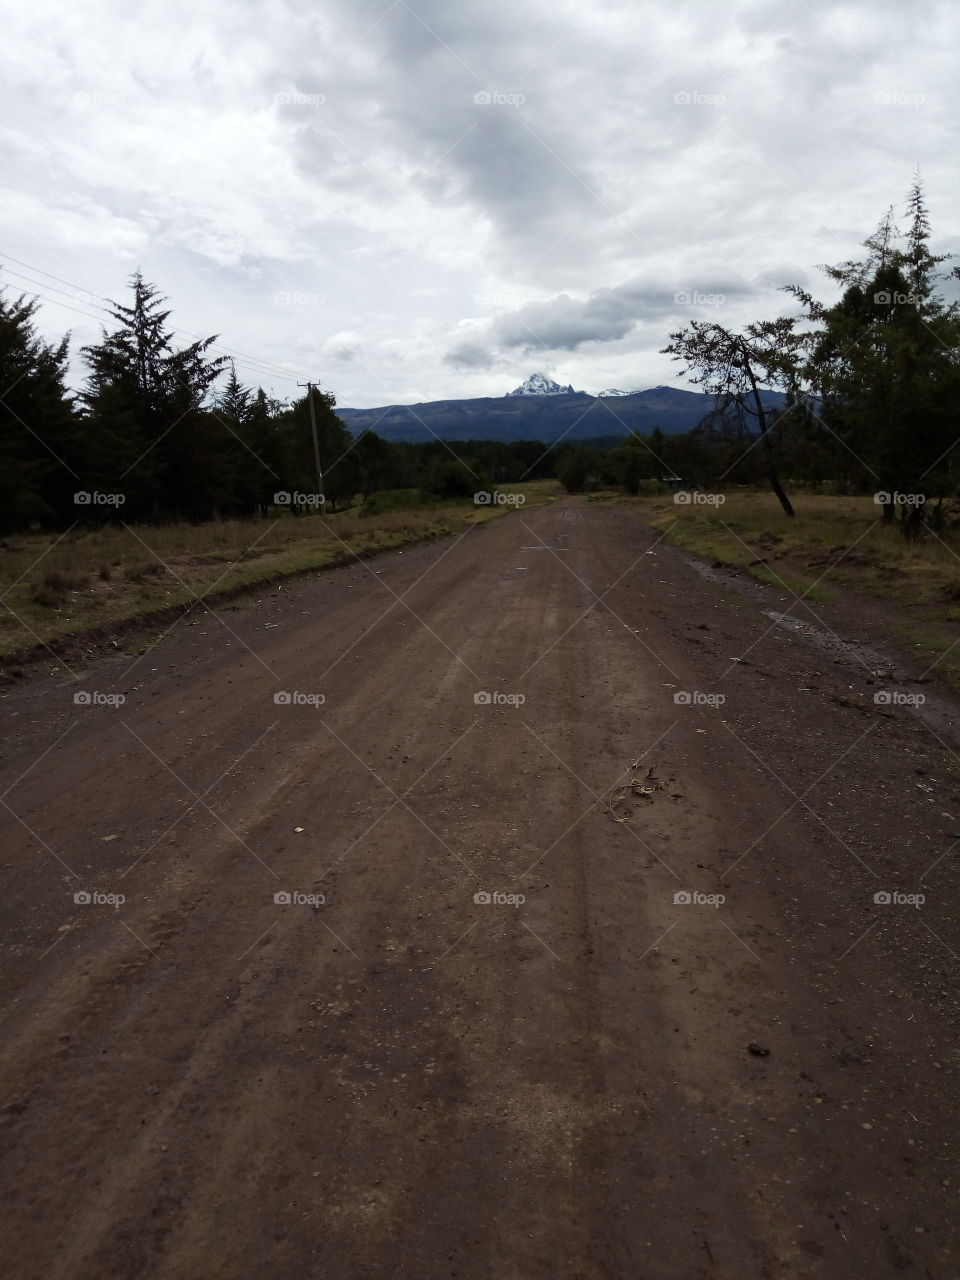 Mt Kenya the largest mountain in Kenya. This the road to the mountain just few kilometers to Solomon gate